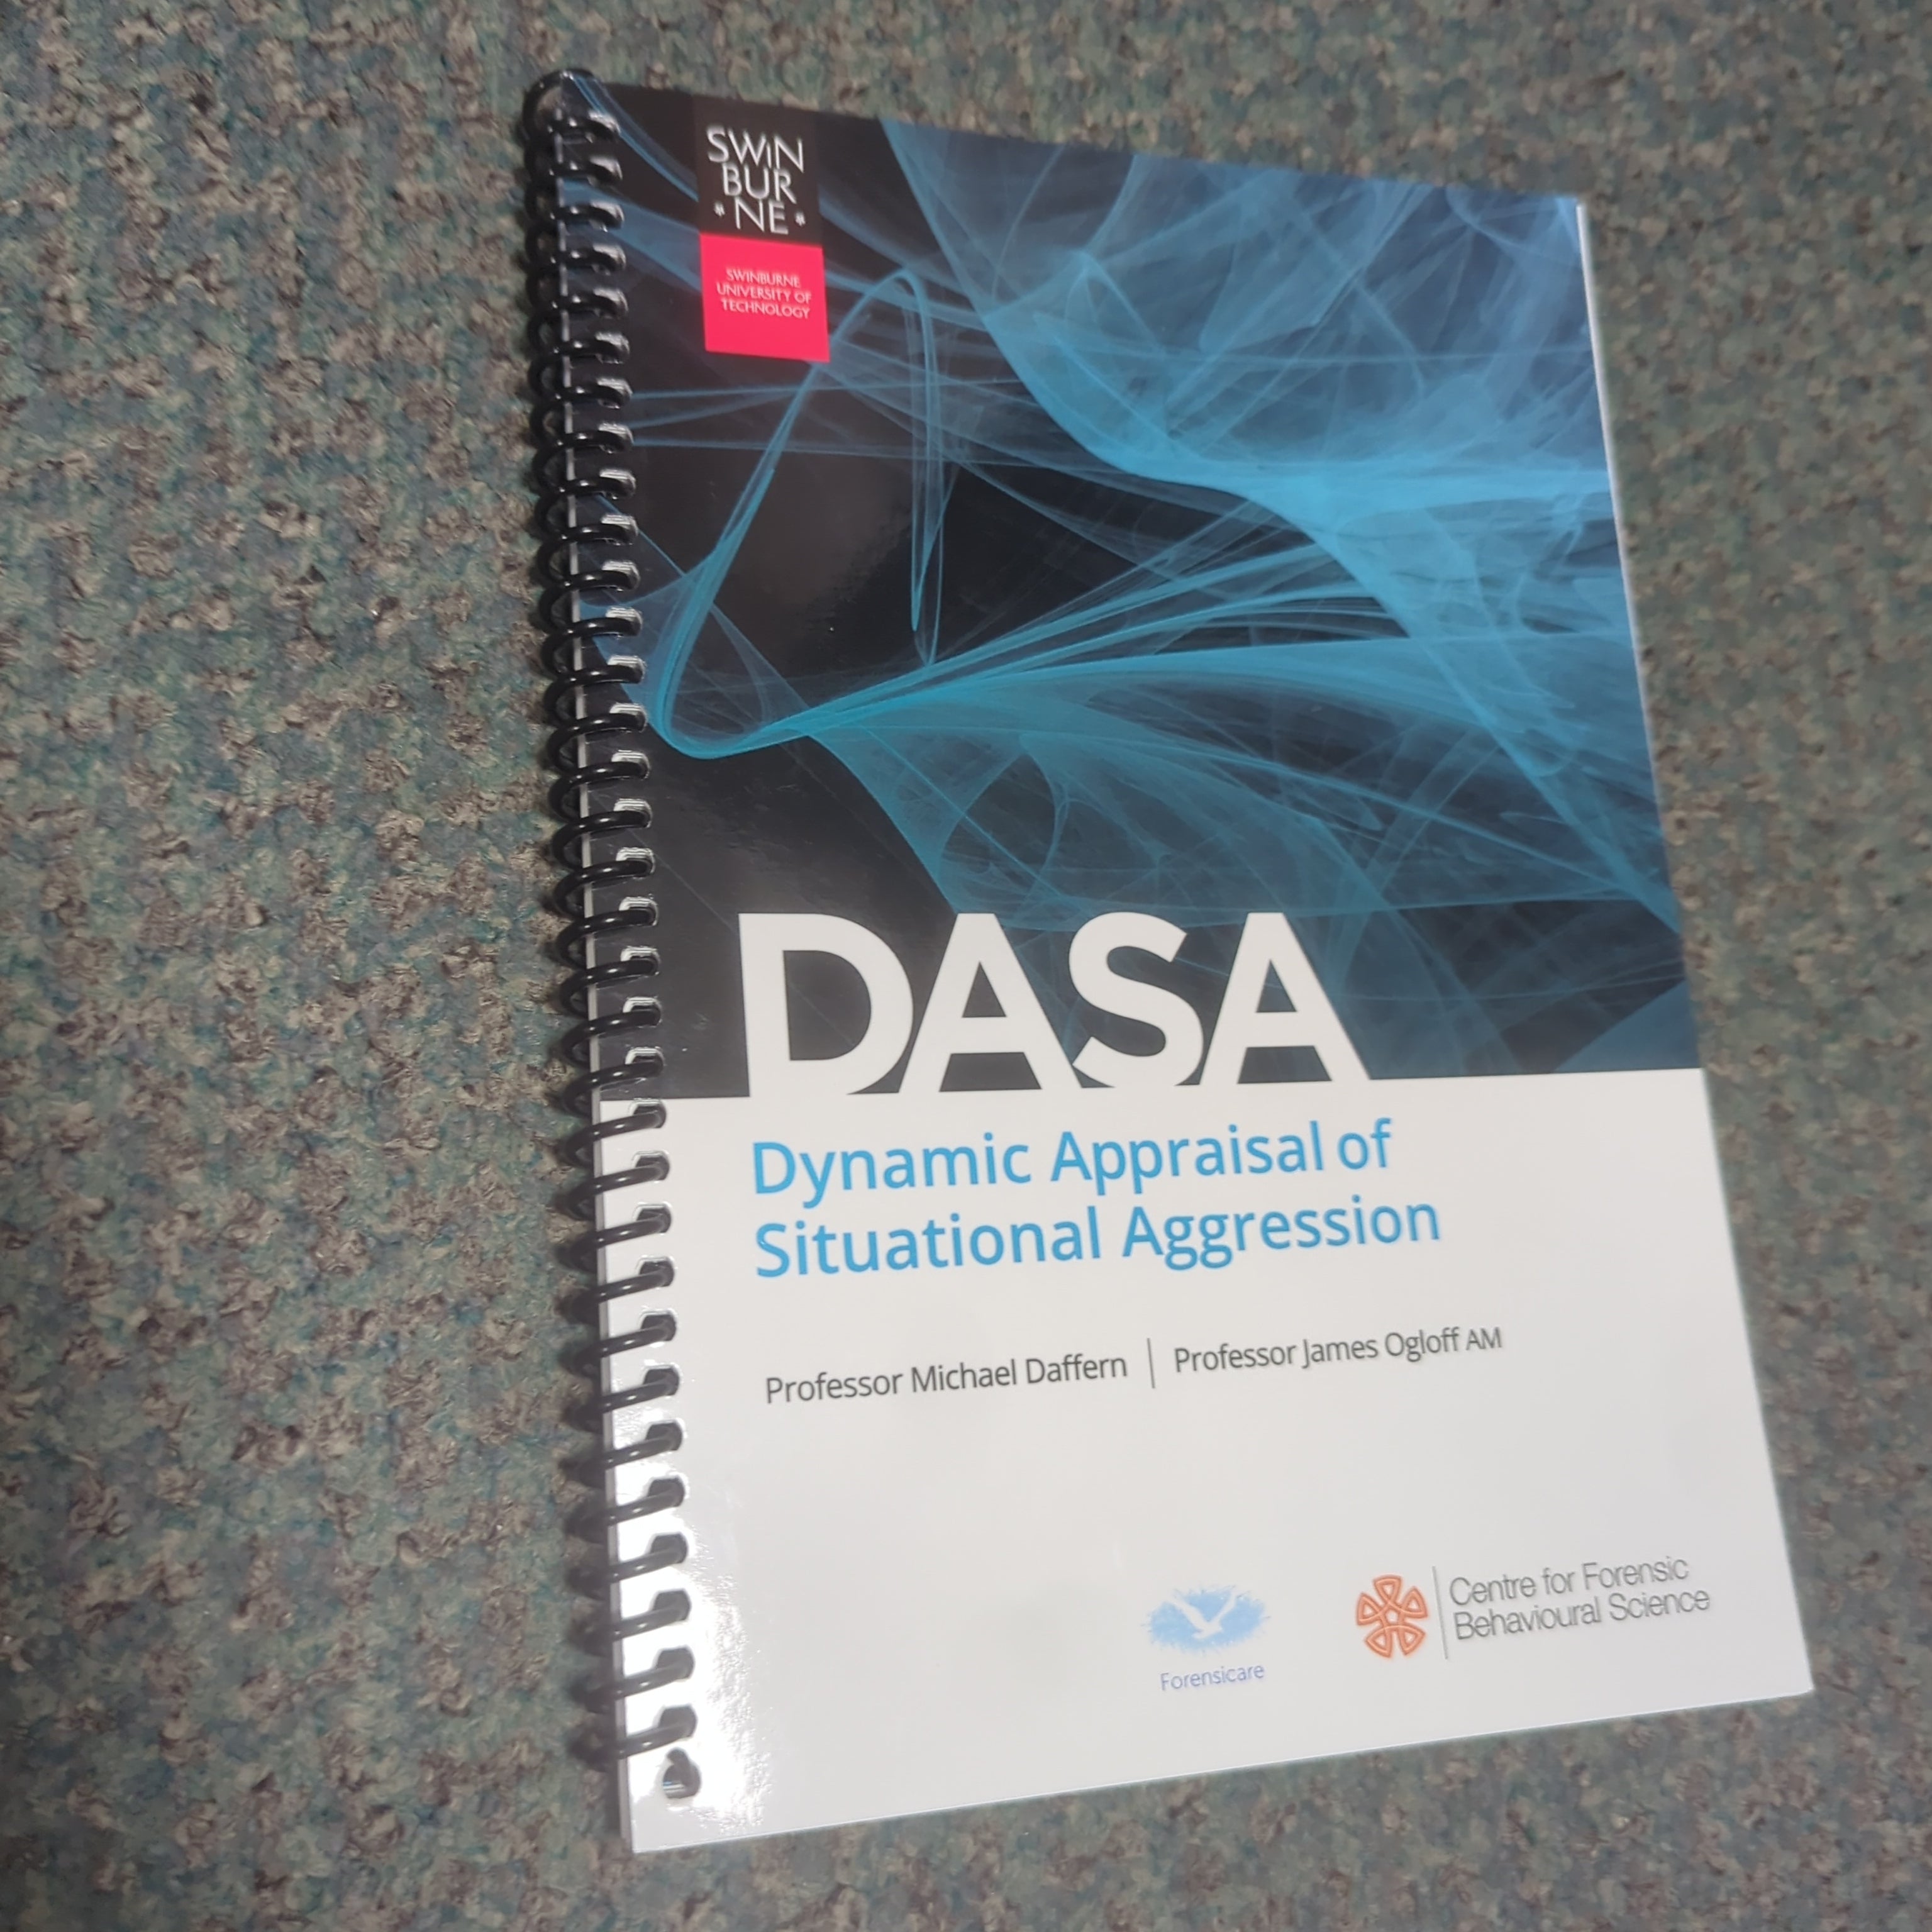 DASA - DYNAMIC APPRAISAL OF SITUATIONAL AGGRESSION